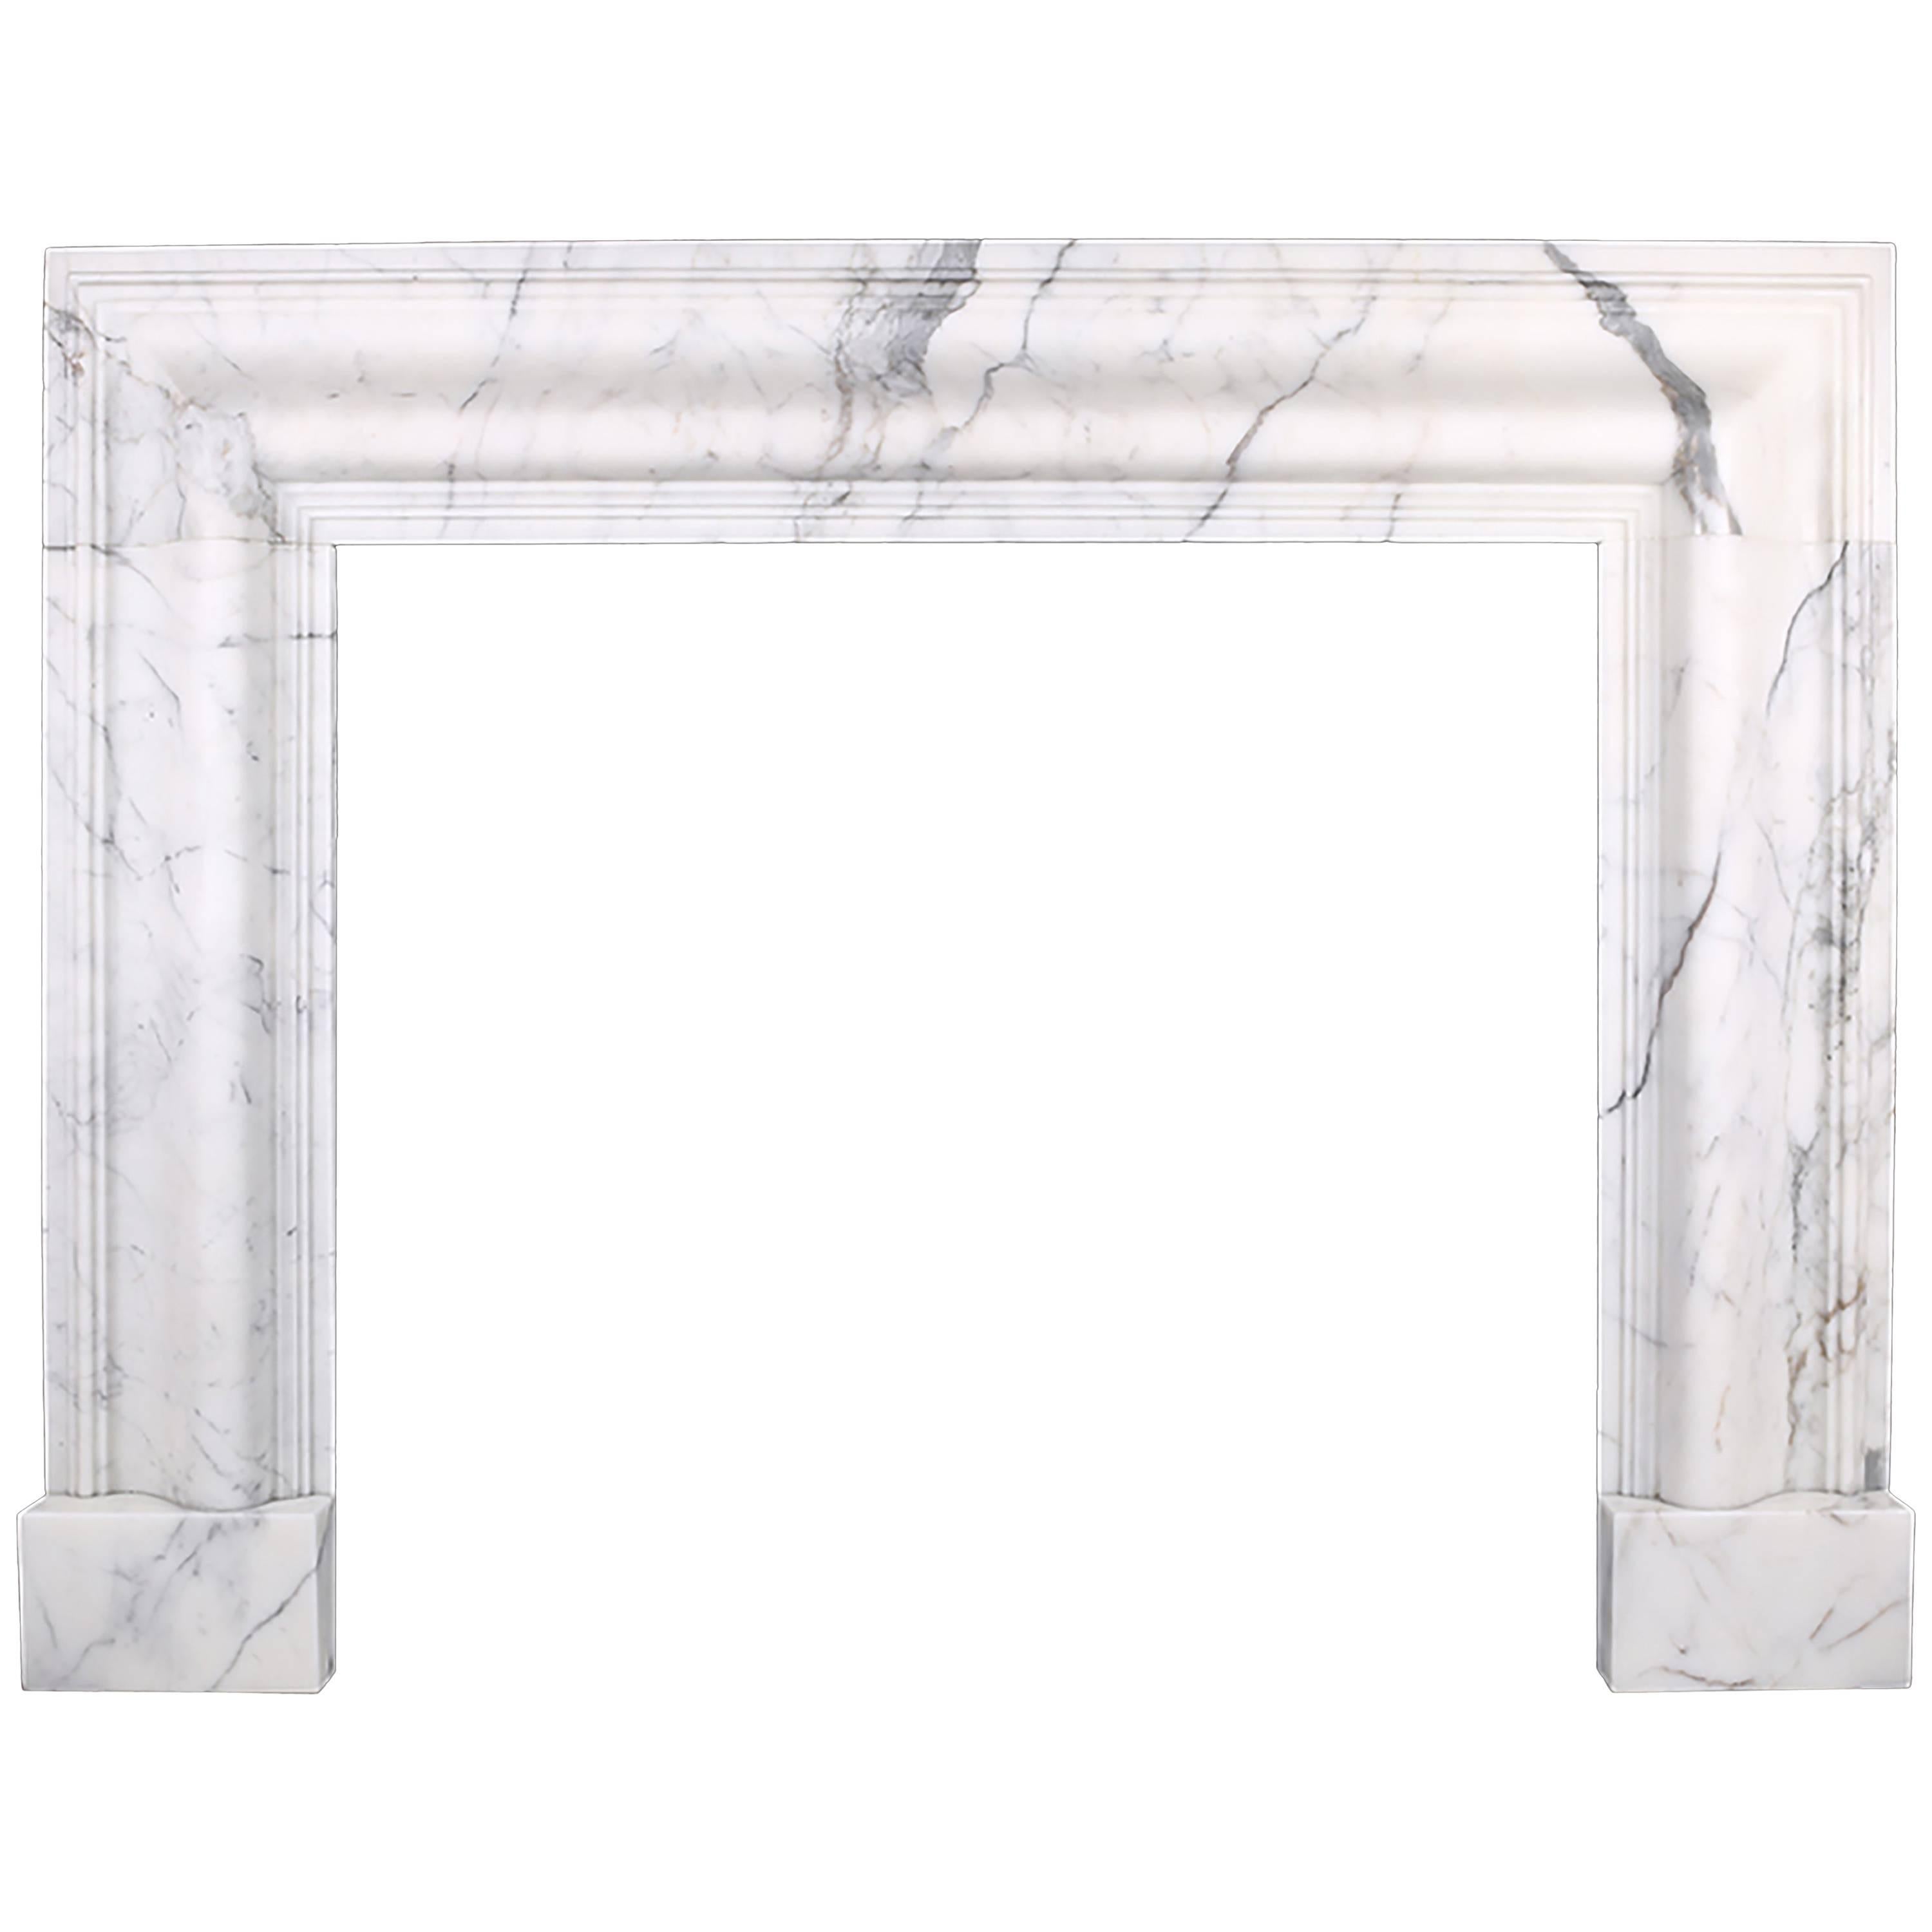 Grand Queen Anne Style Bolection Fireplace in Italian Statuary Marble For Sale